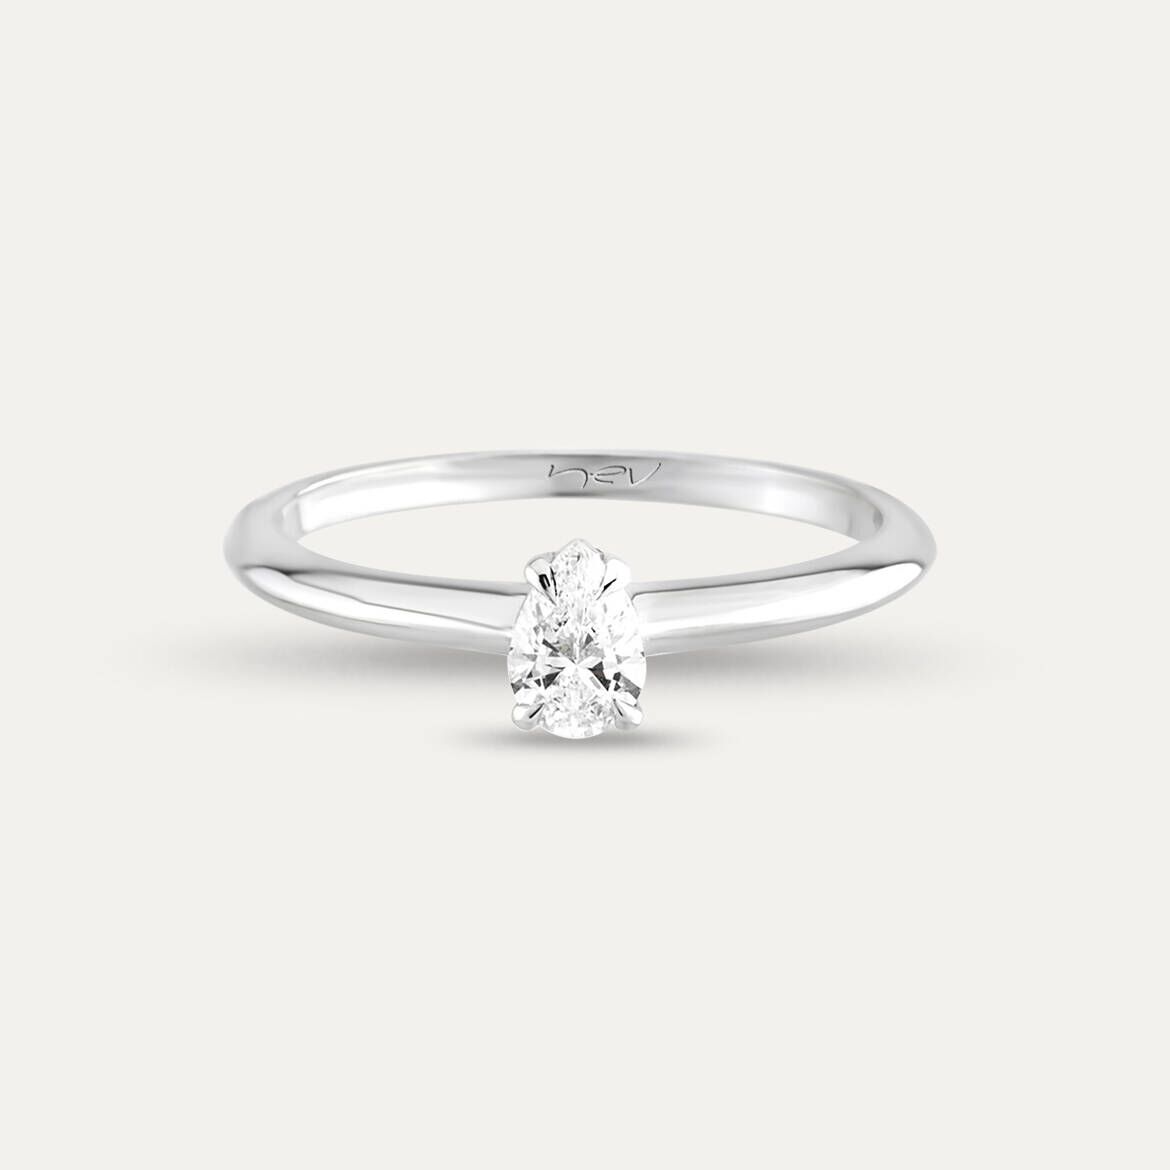 Janet 0.33 CT Pear Cut Diamond White Gold Solitaire Ring